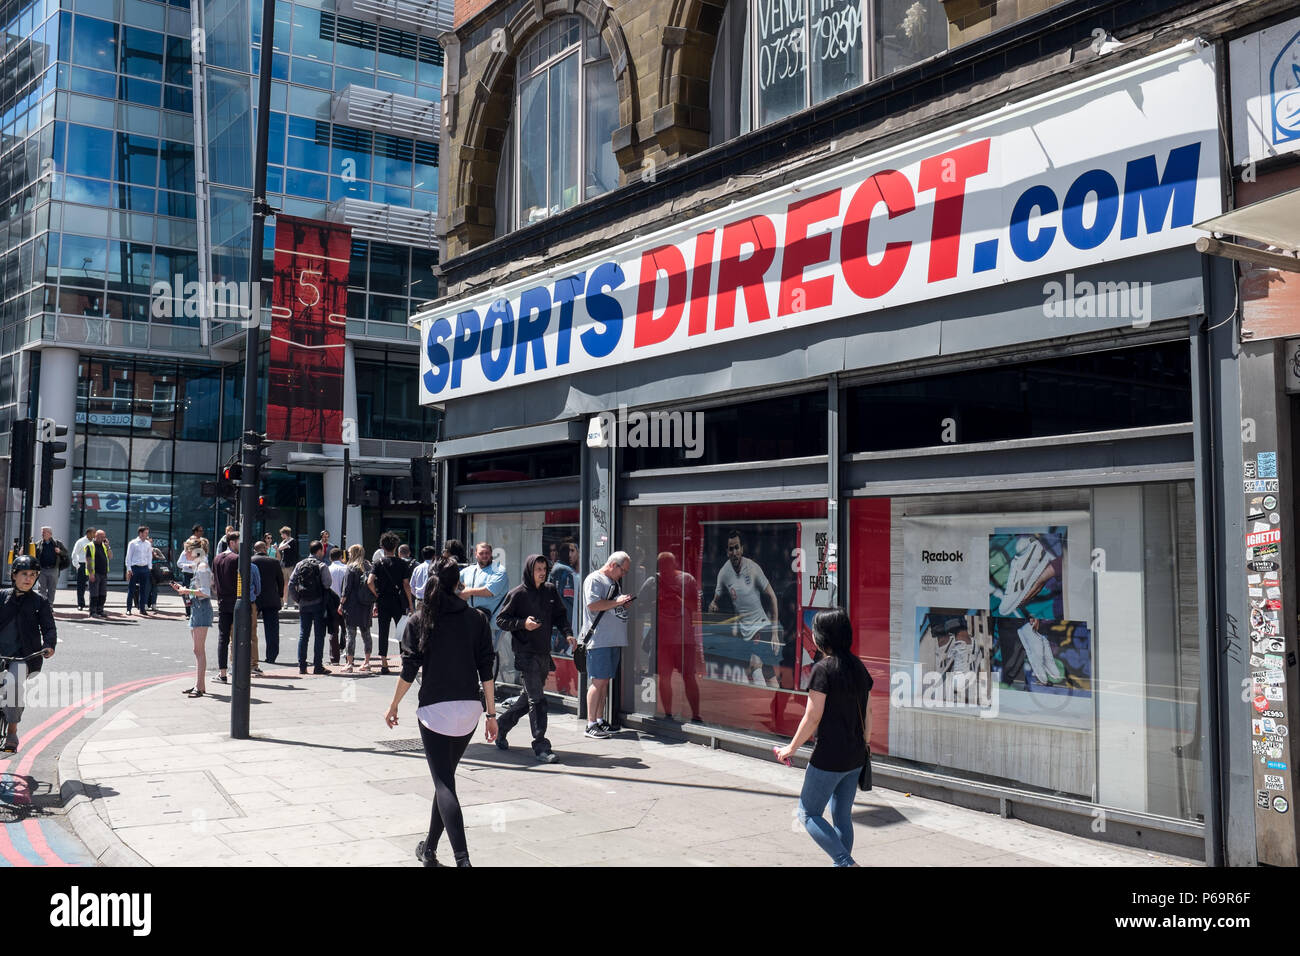 London sports direct shop stock photography and images Page 2 - Alamy